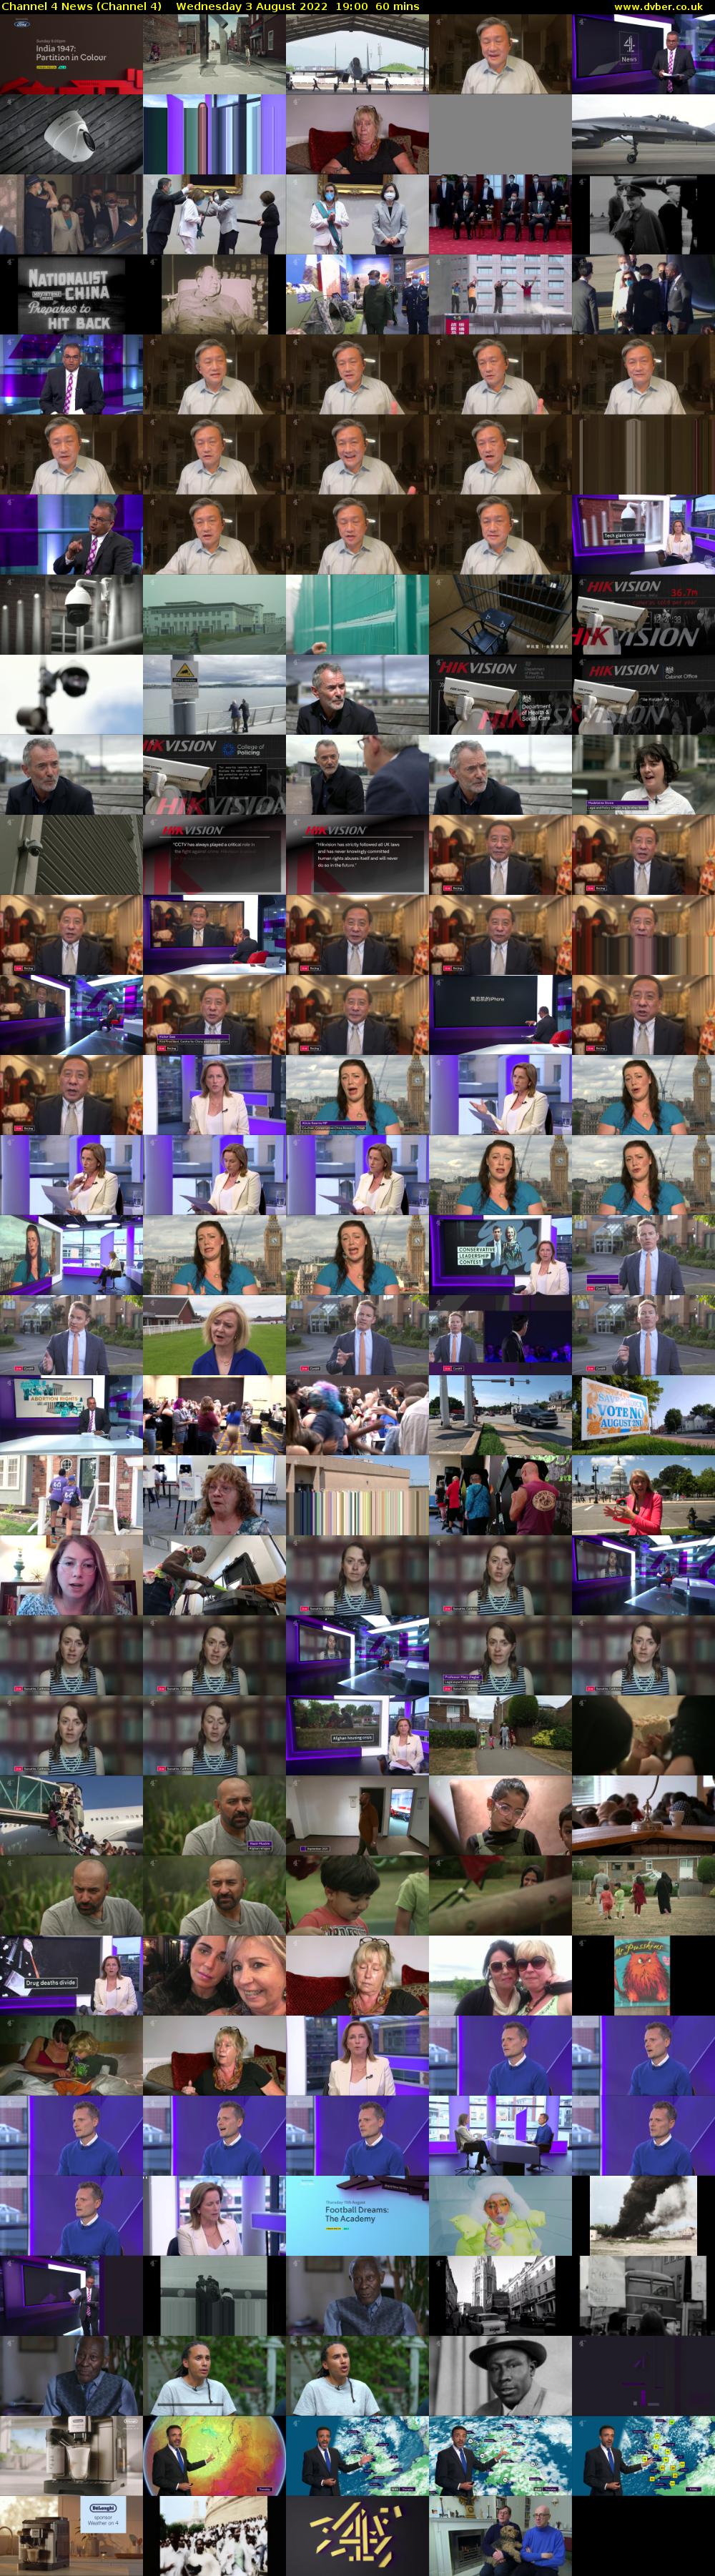 Channel 4 News (Channel 4) Wednesday 3 August 2022 19:00 - 20:00